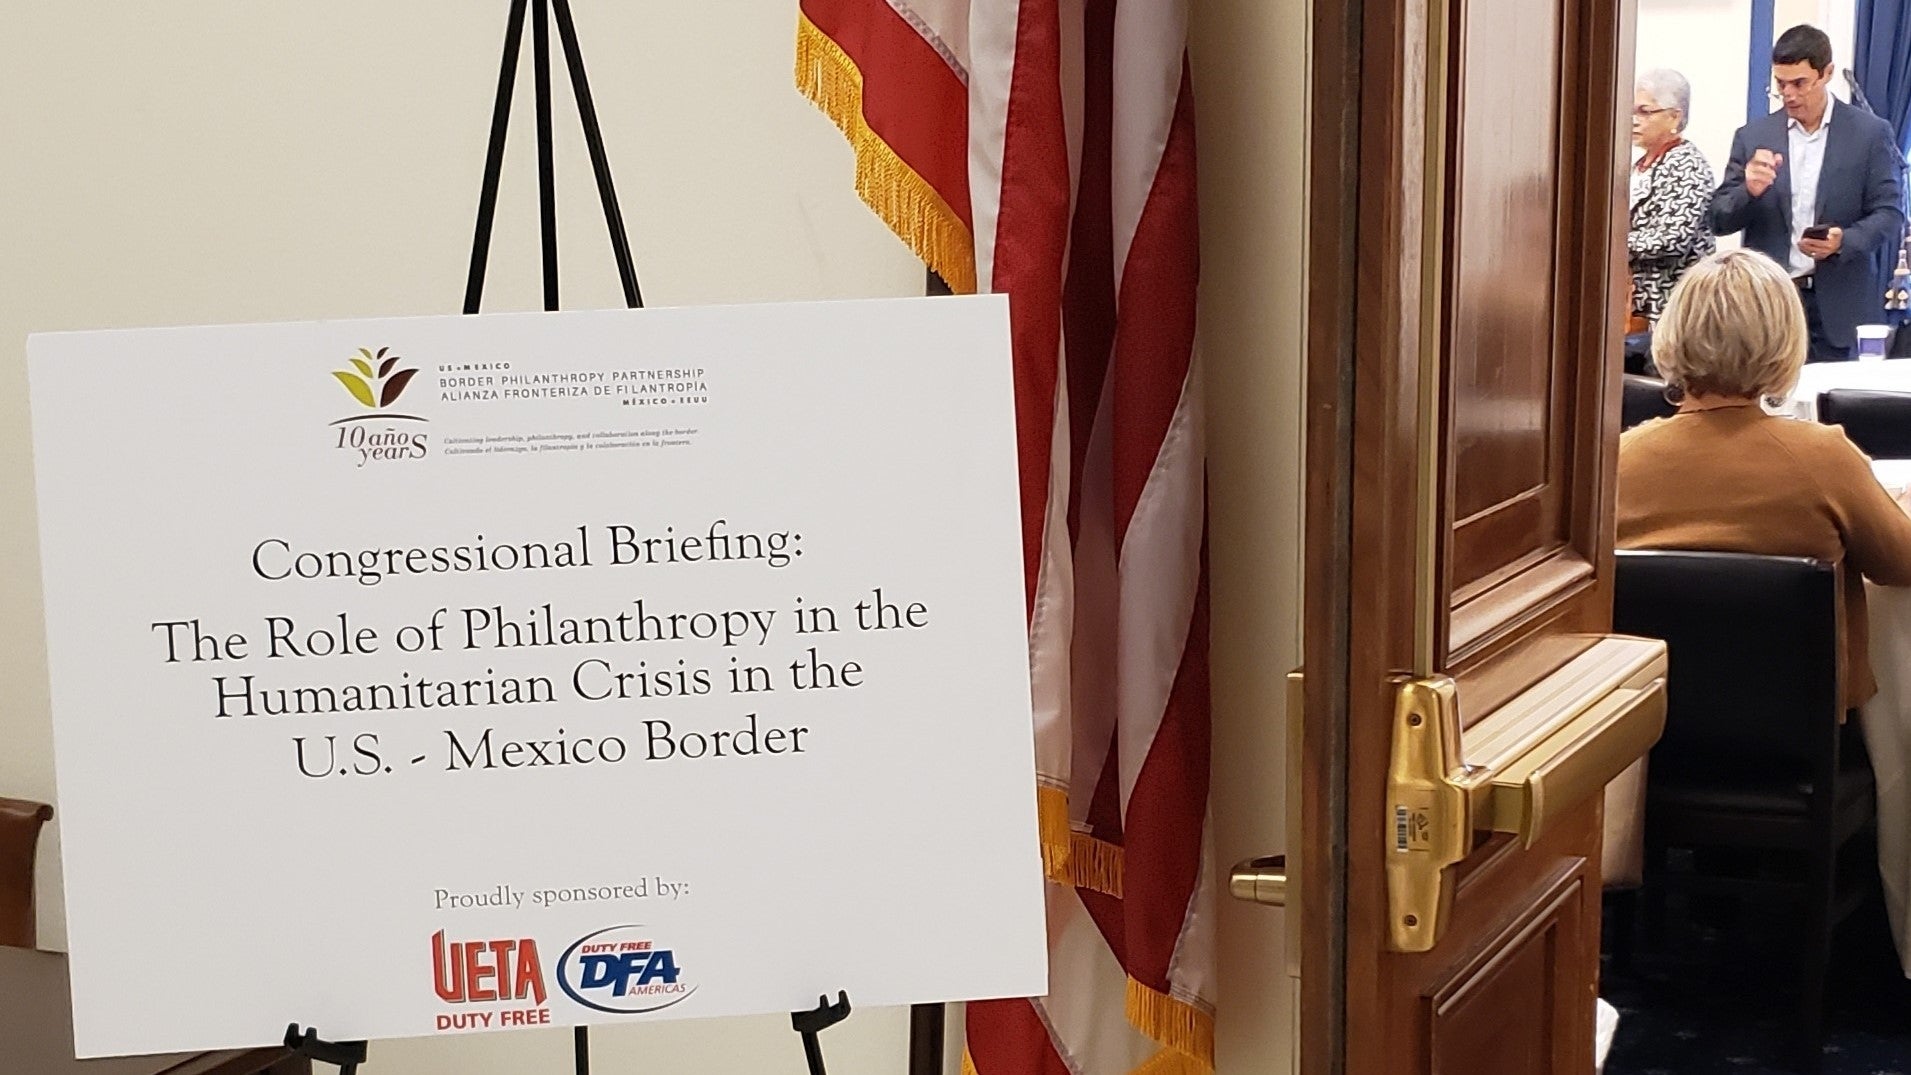 A sign outside of an open conference room reads "Congressional Briefing: The Role of Philanthrophy in the Humanitarian Crisis in the U.S.-Mexican Border". There are several logos included on the sign.